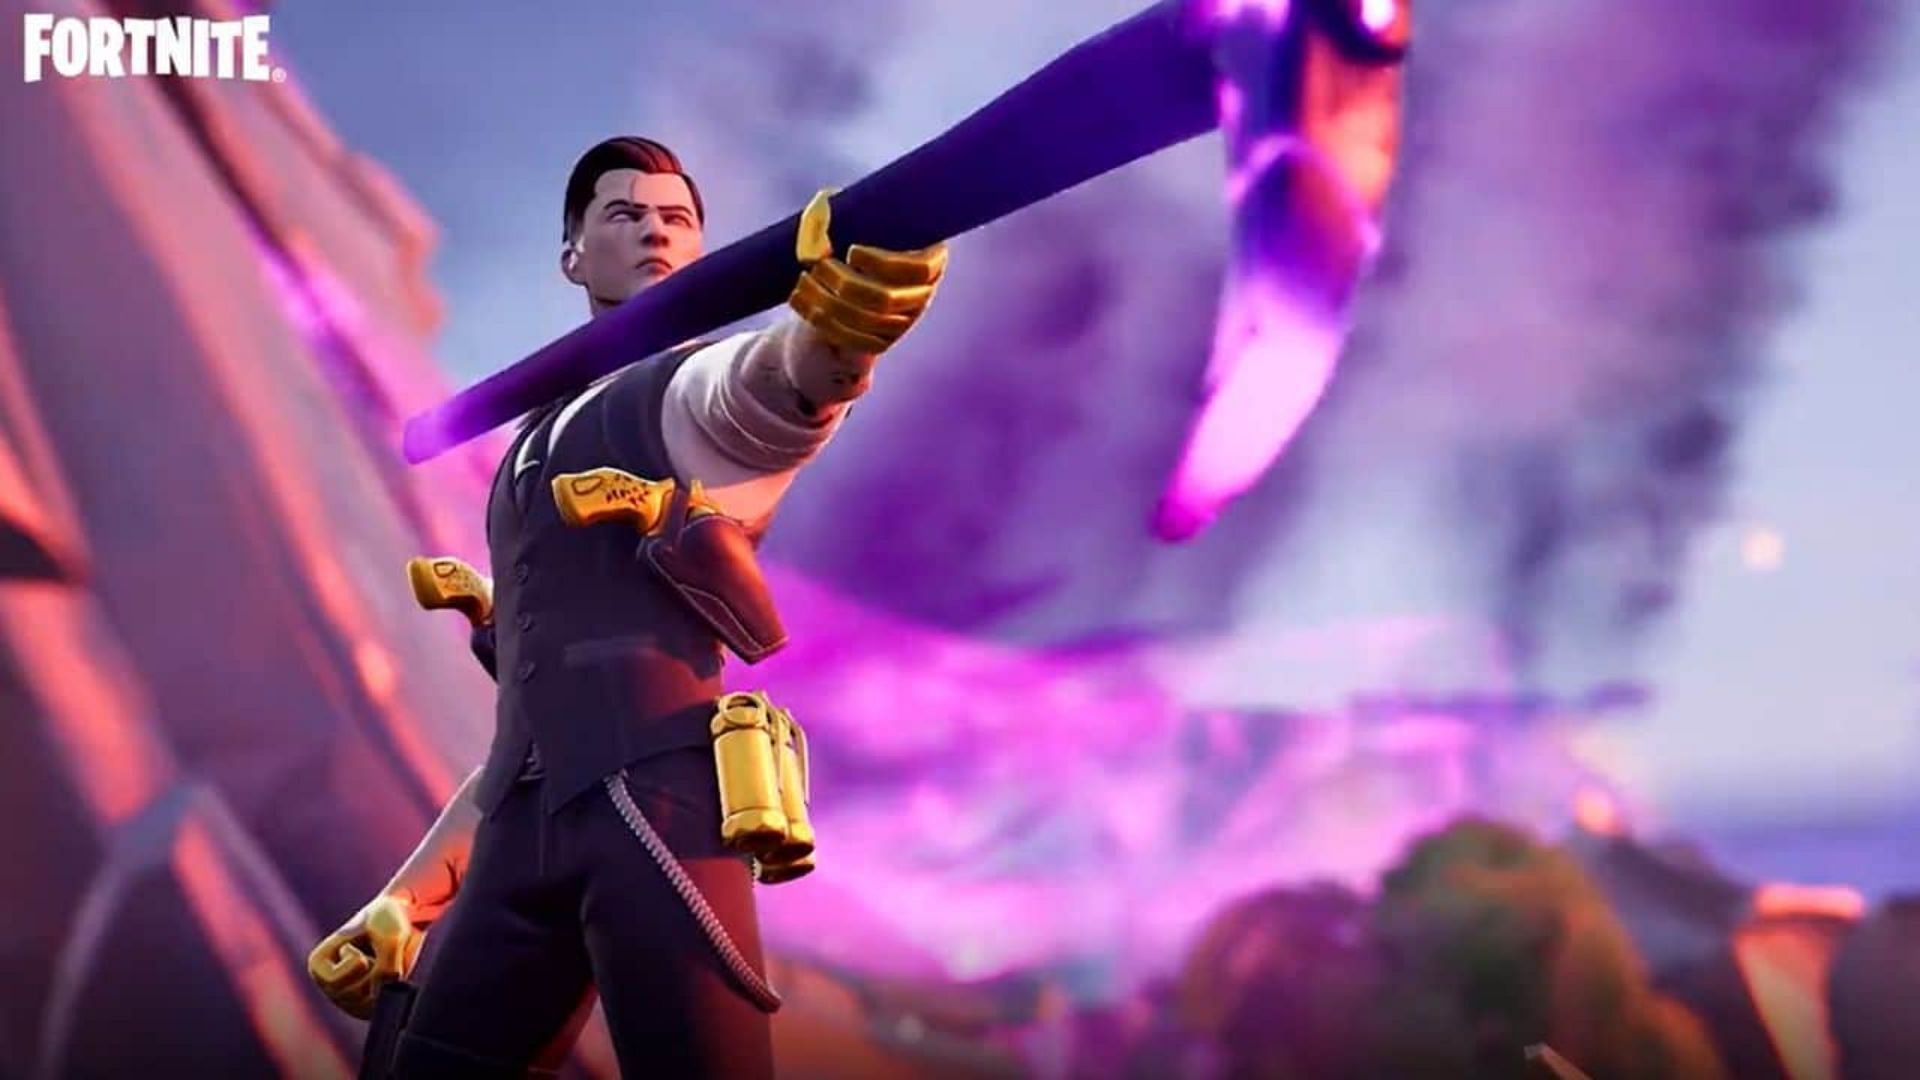 Why did Fortnite remove Midas skin? Explained